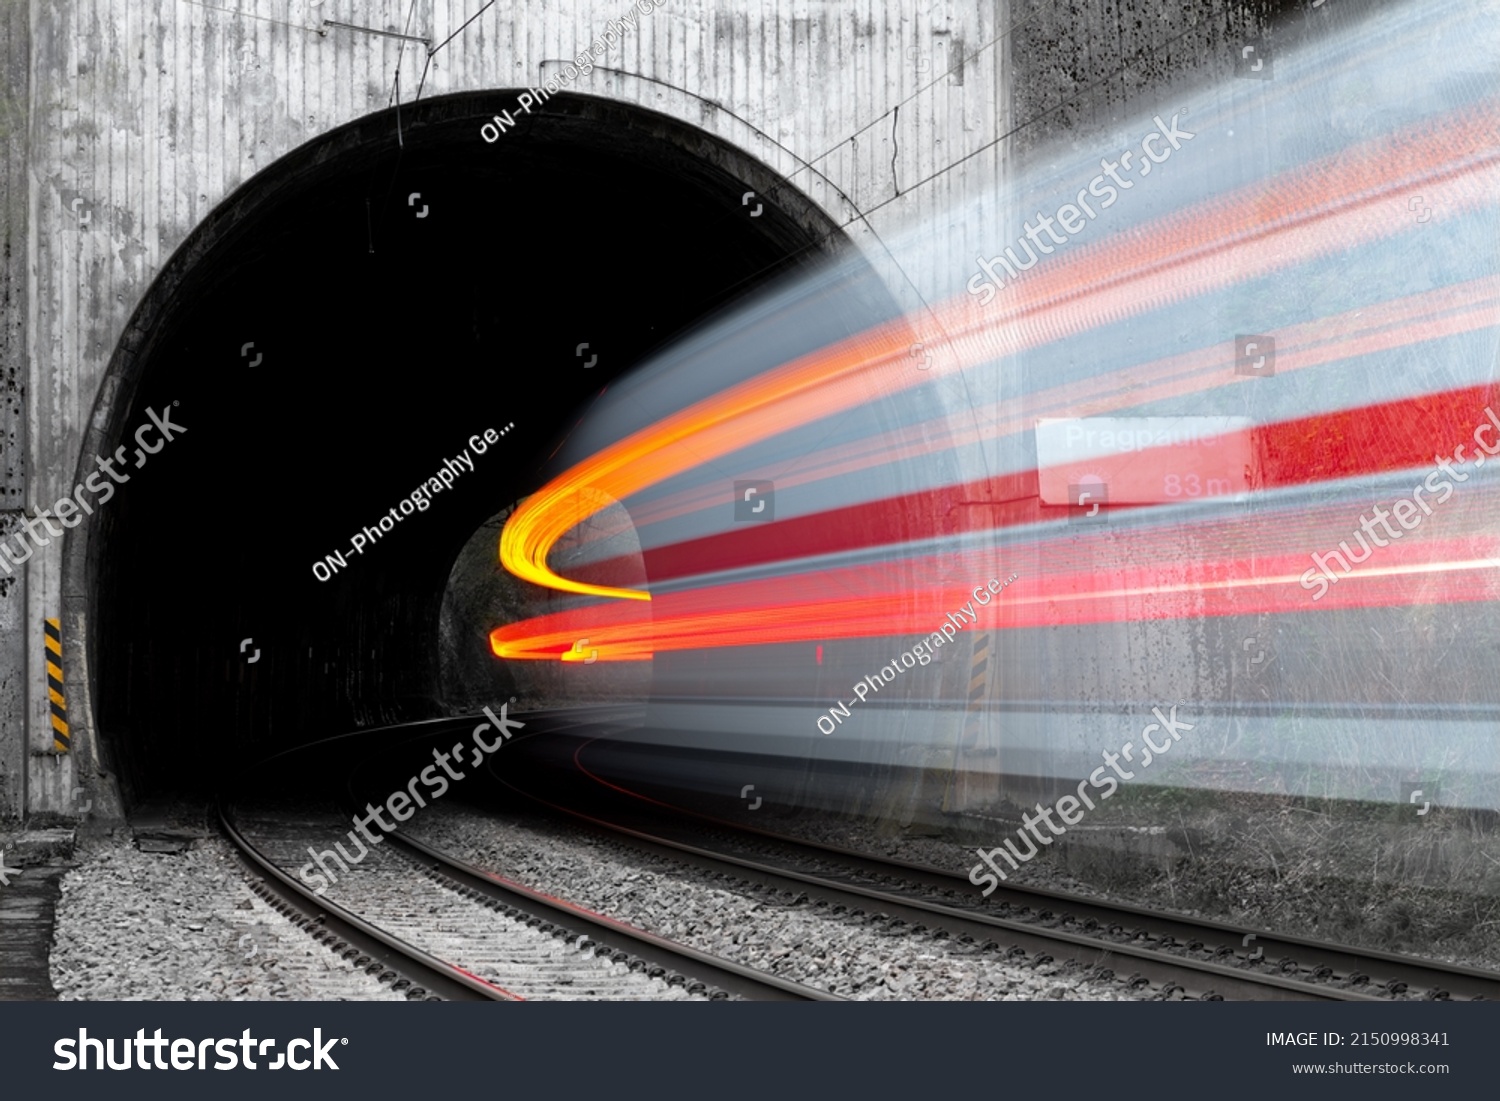 Fast train entering a tunnel with old concrete portal near Altena Germany in rural Lenne valley. Long time exposure shows motion of white and red passenger train in a curve vanishing in the darkness. #2150998341